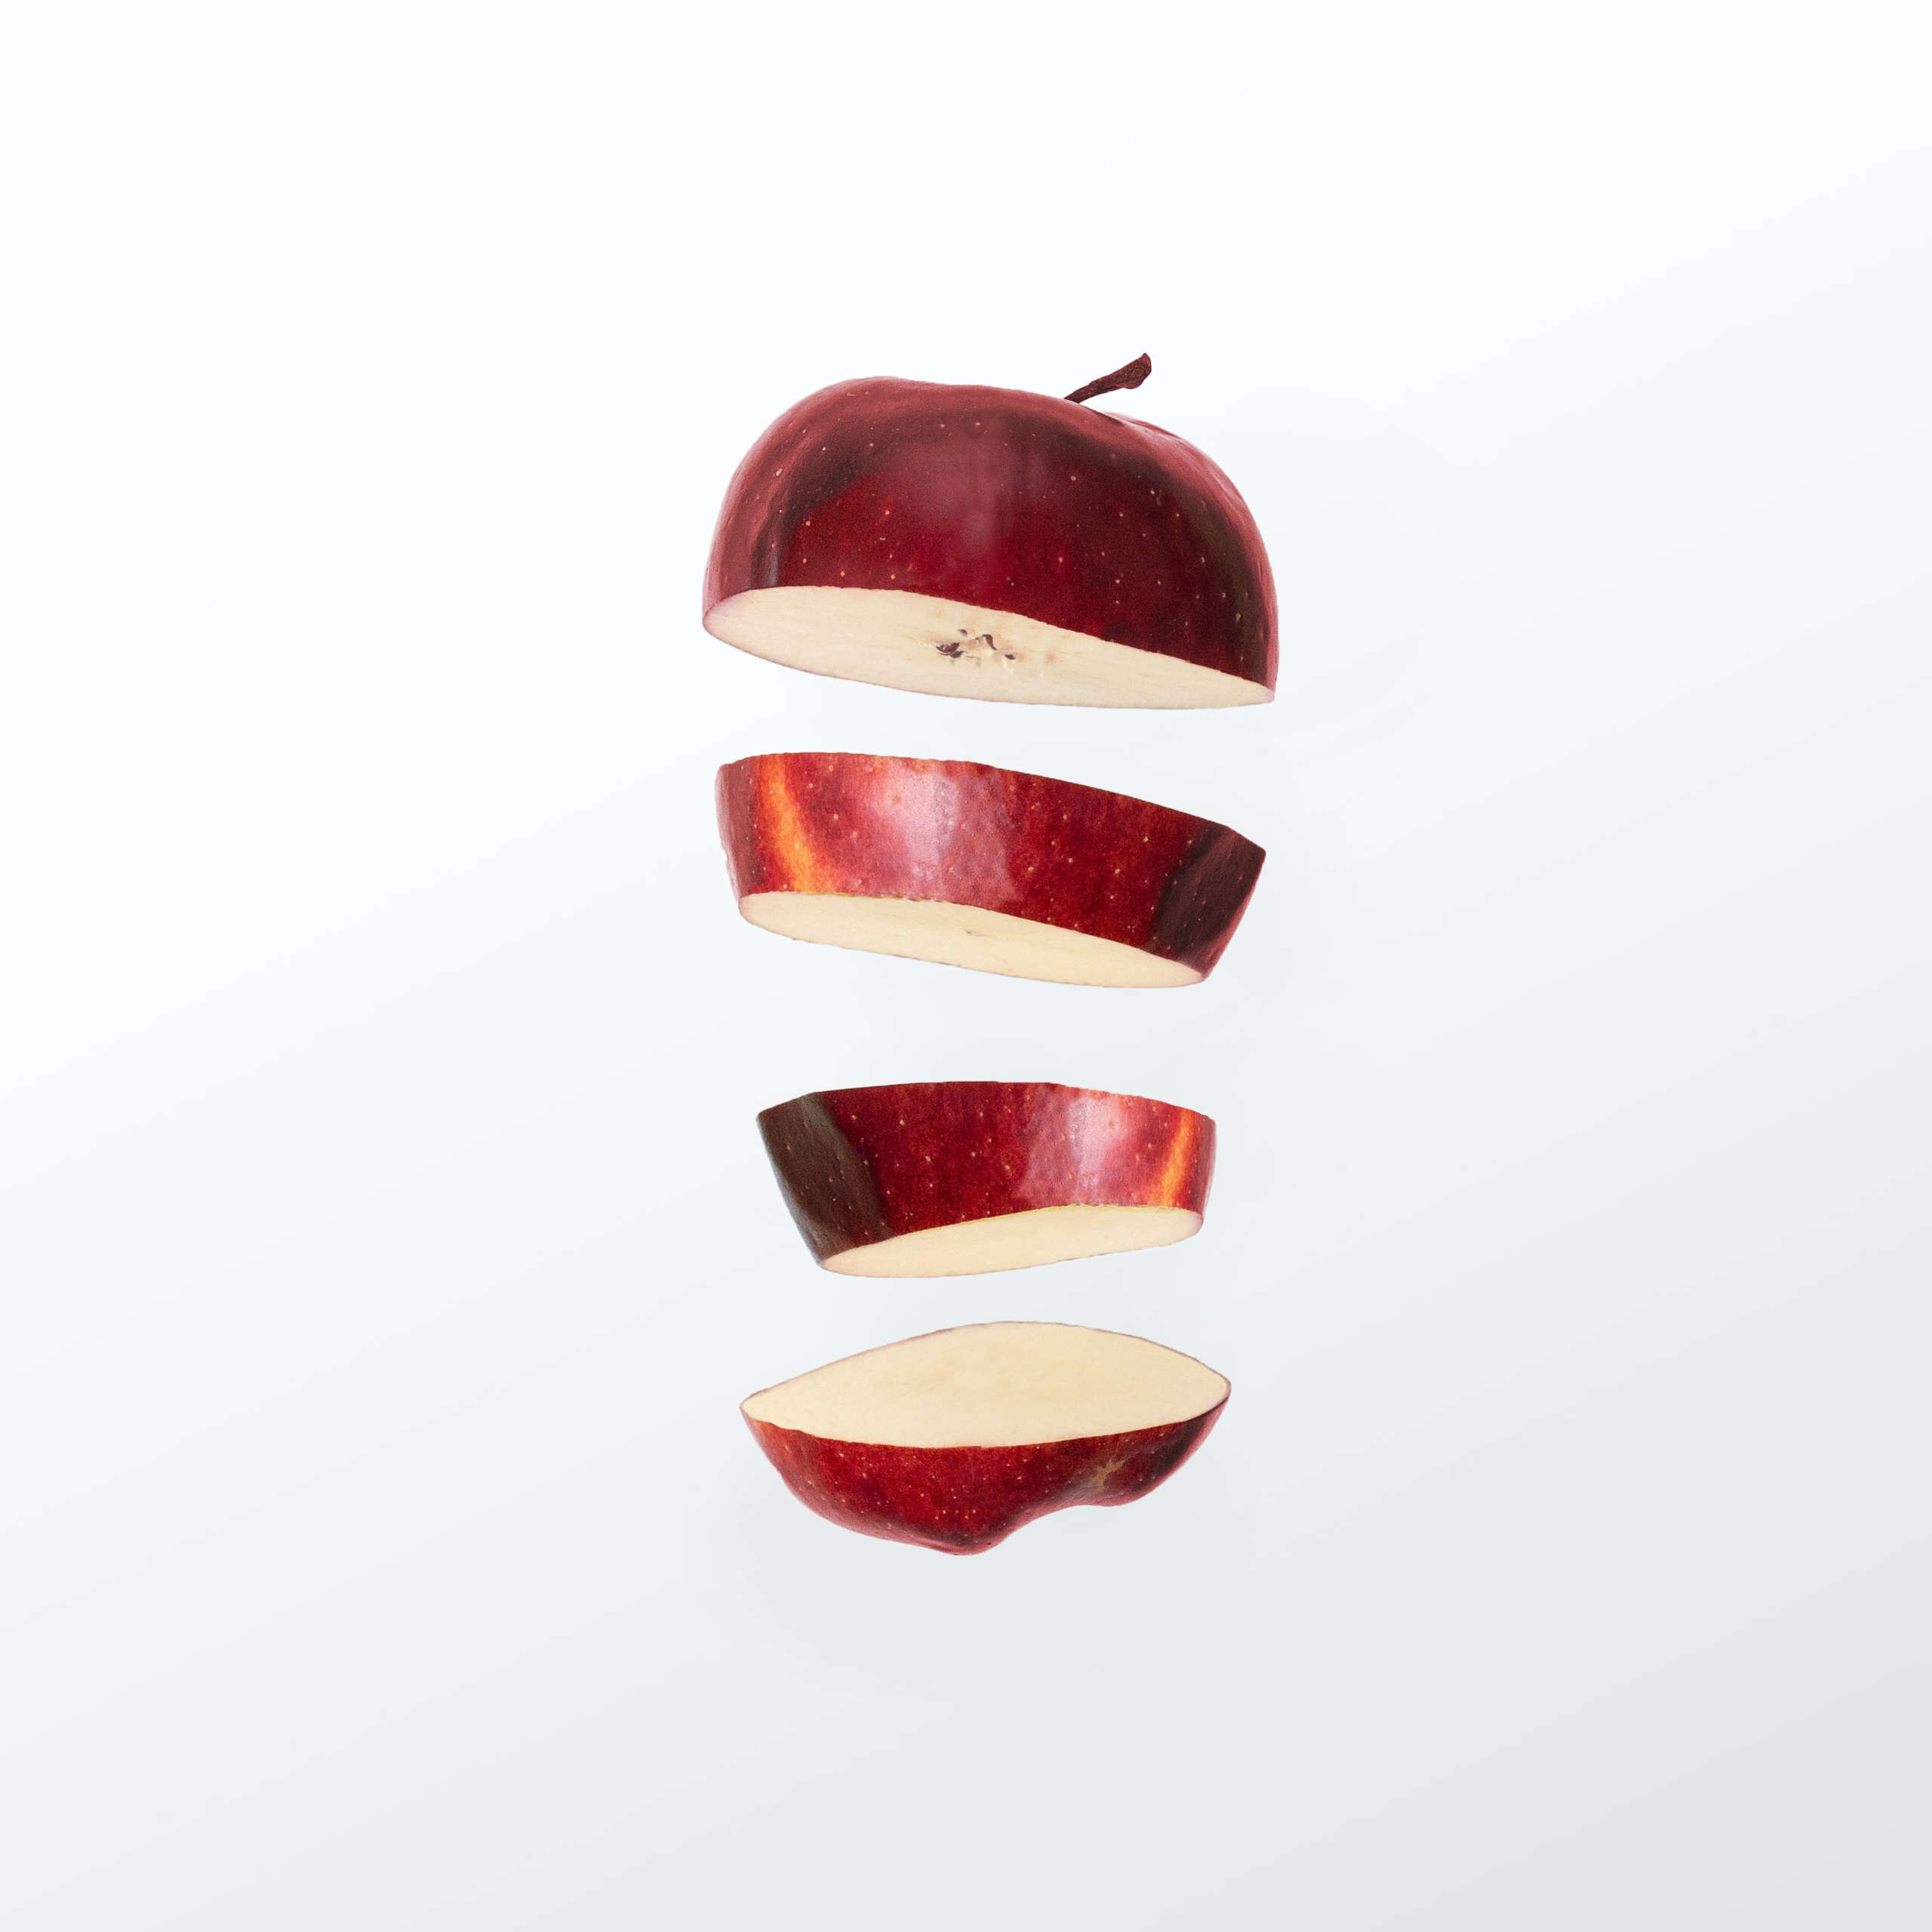 DLegal Law Office - apple